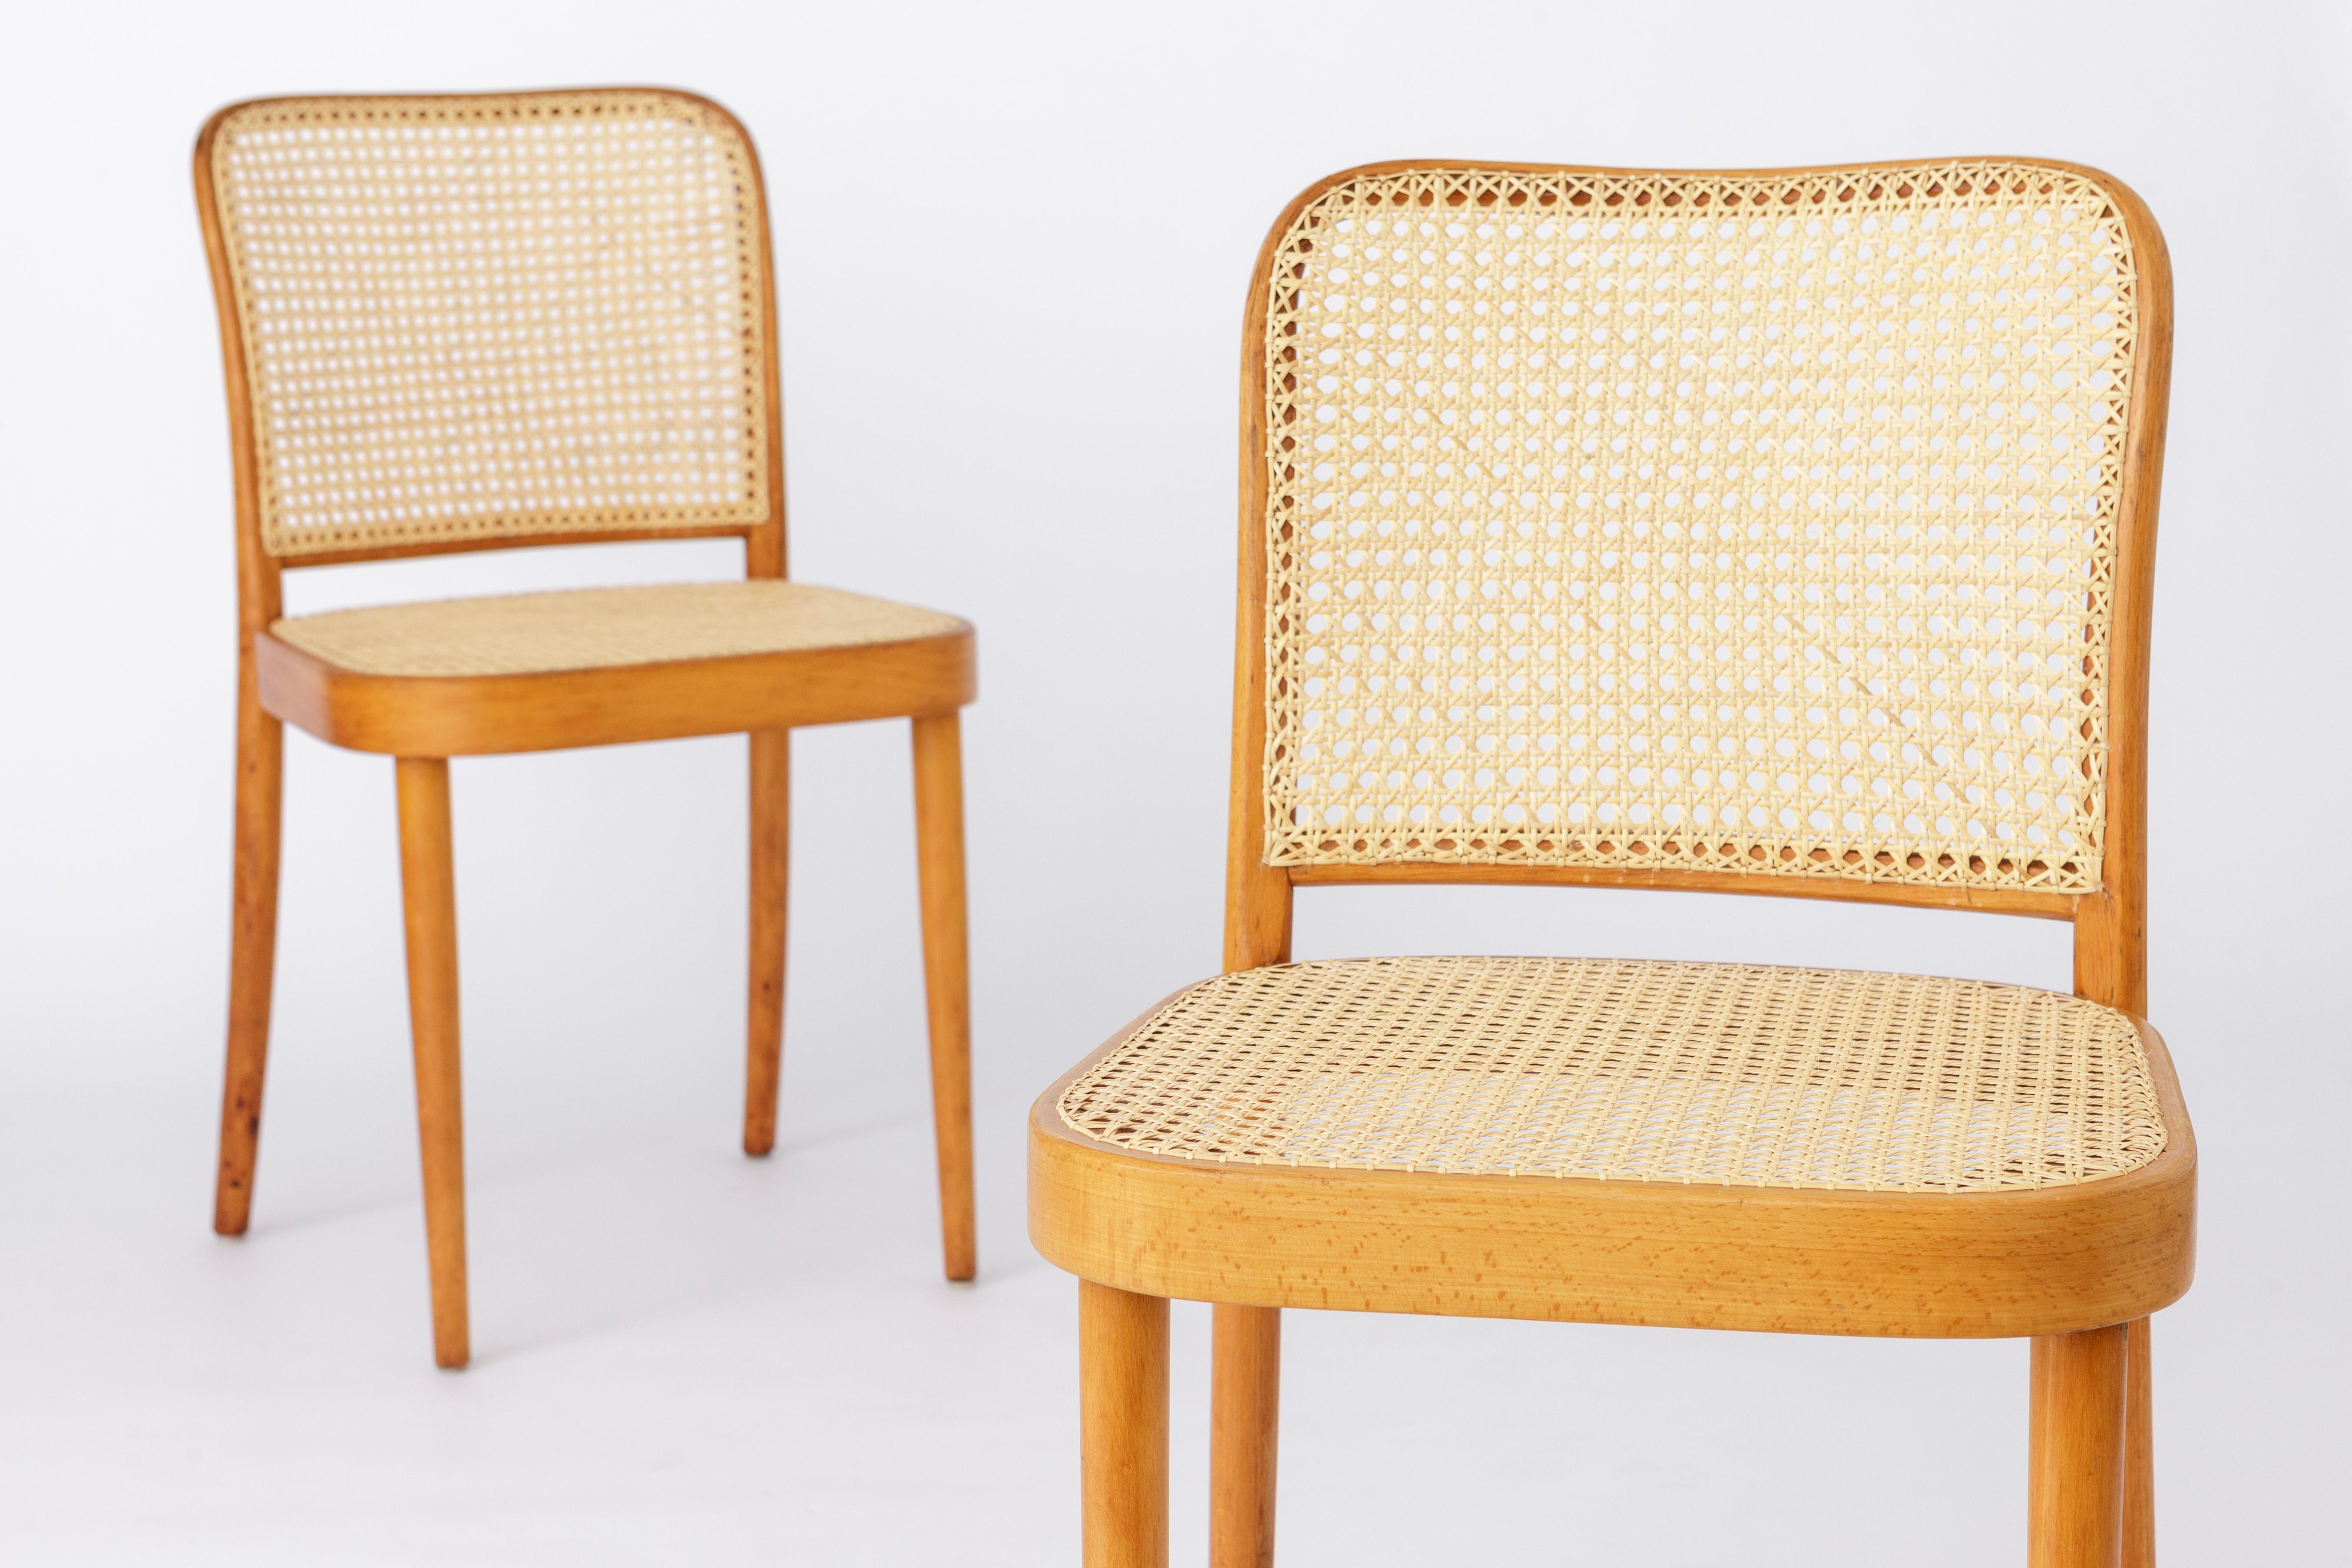 Pair of bentwood chairs from Czechoslovakia by manufacturer Ligna. 
Production period: 1960s-1970s. 
Displayed price is for a set of 2. Totally up to 8 chairs (4 pairs) available. 

Sturdy beech wood frame. Renewed Viennese weaving on seat and back.